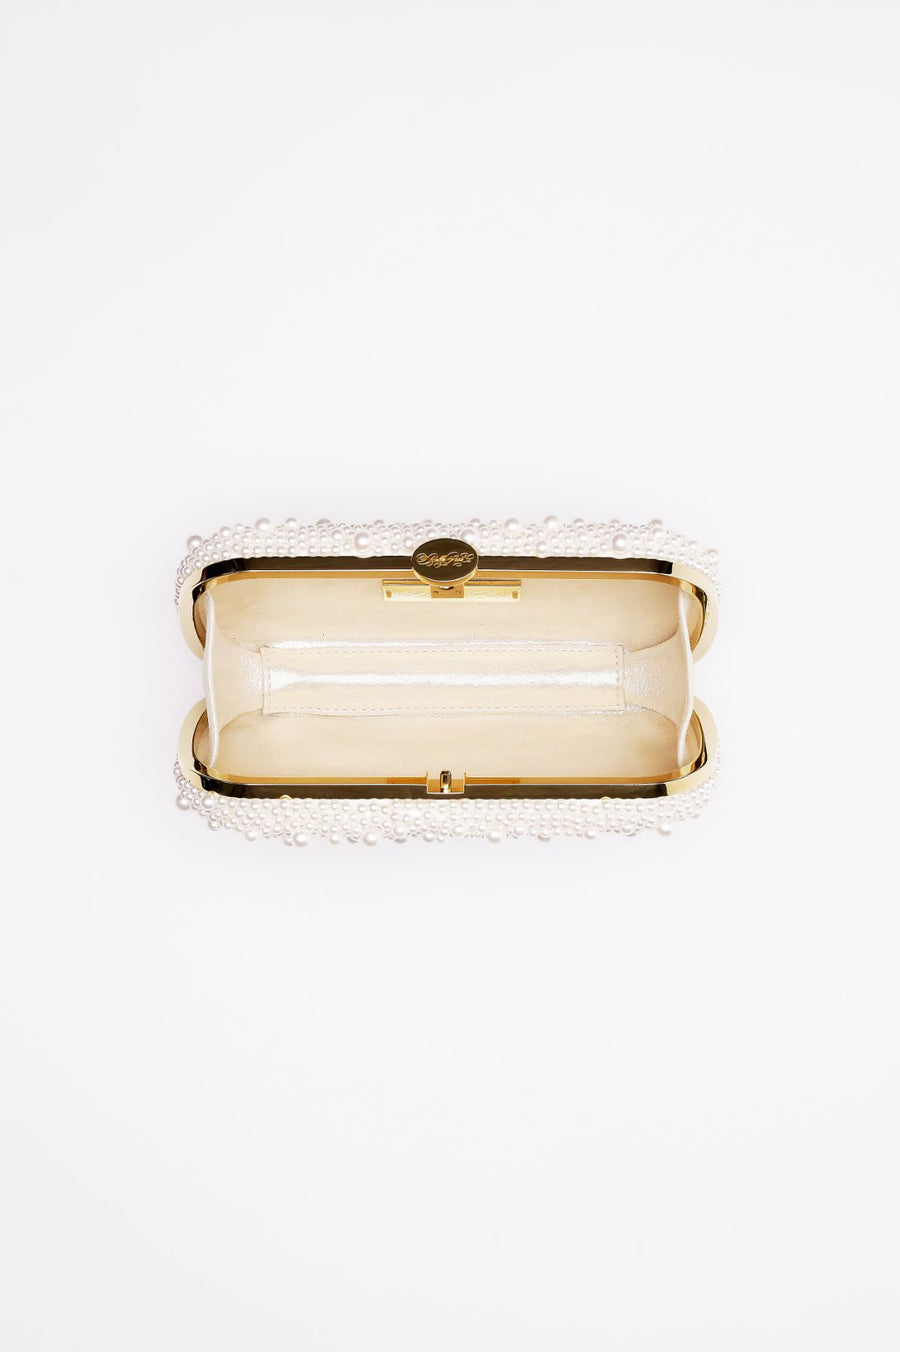 Top open view of True Love Pearl Bella Clutch satin with gold hardware frame.